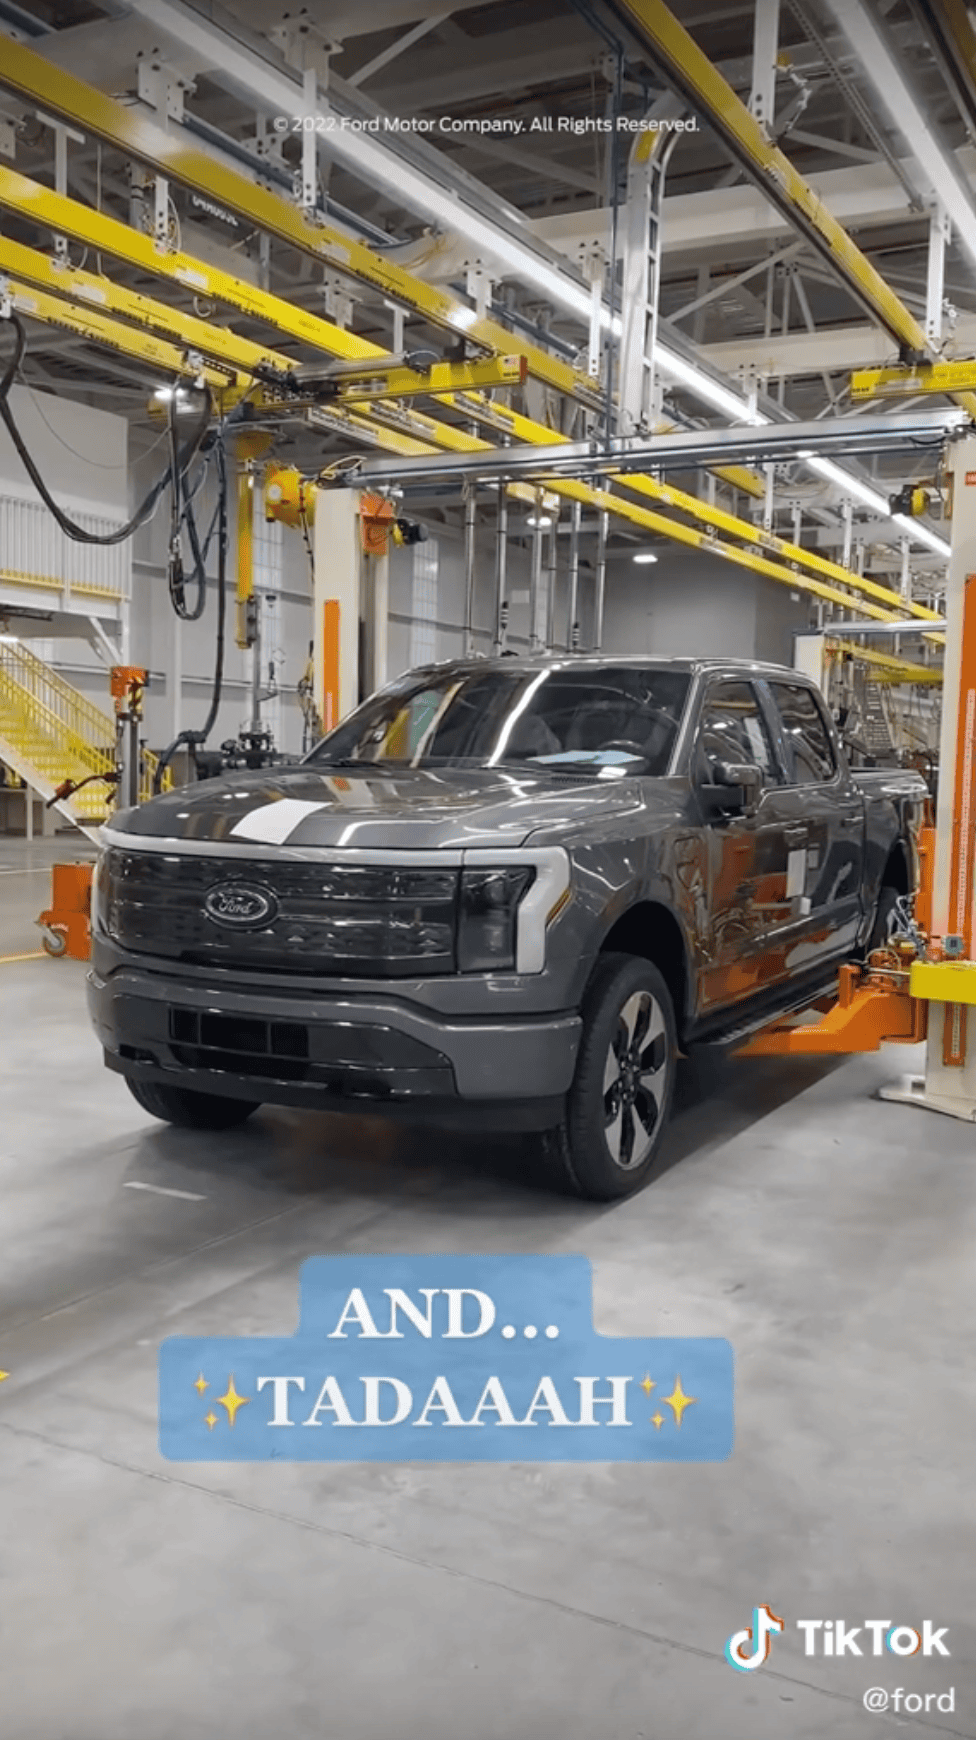 Ford F-150 Lightning F-150 Lightning Production Assembly Plant Video Shared by Ford on Tiktok f150 lightning production assembly line plant 1